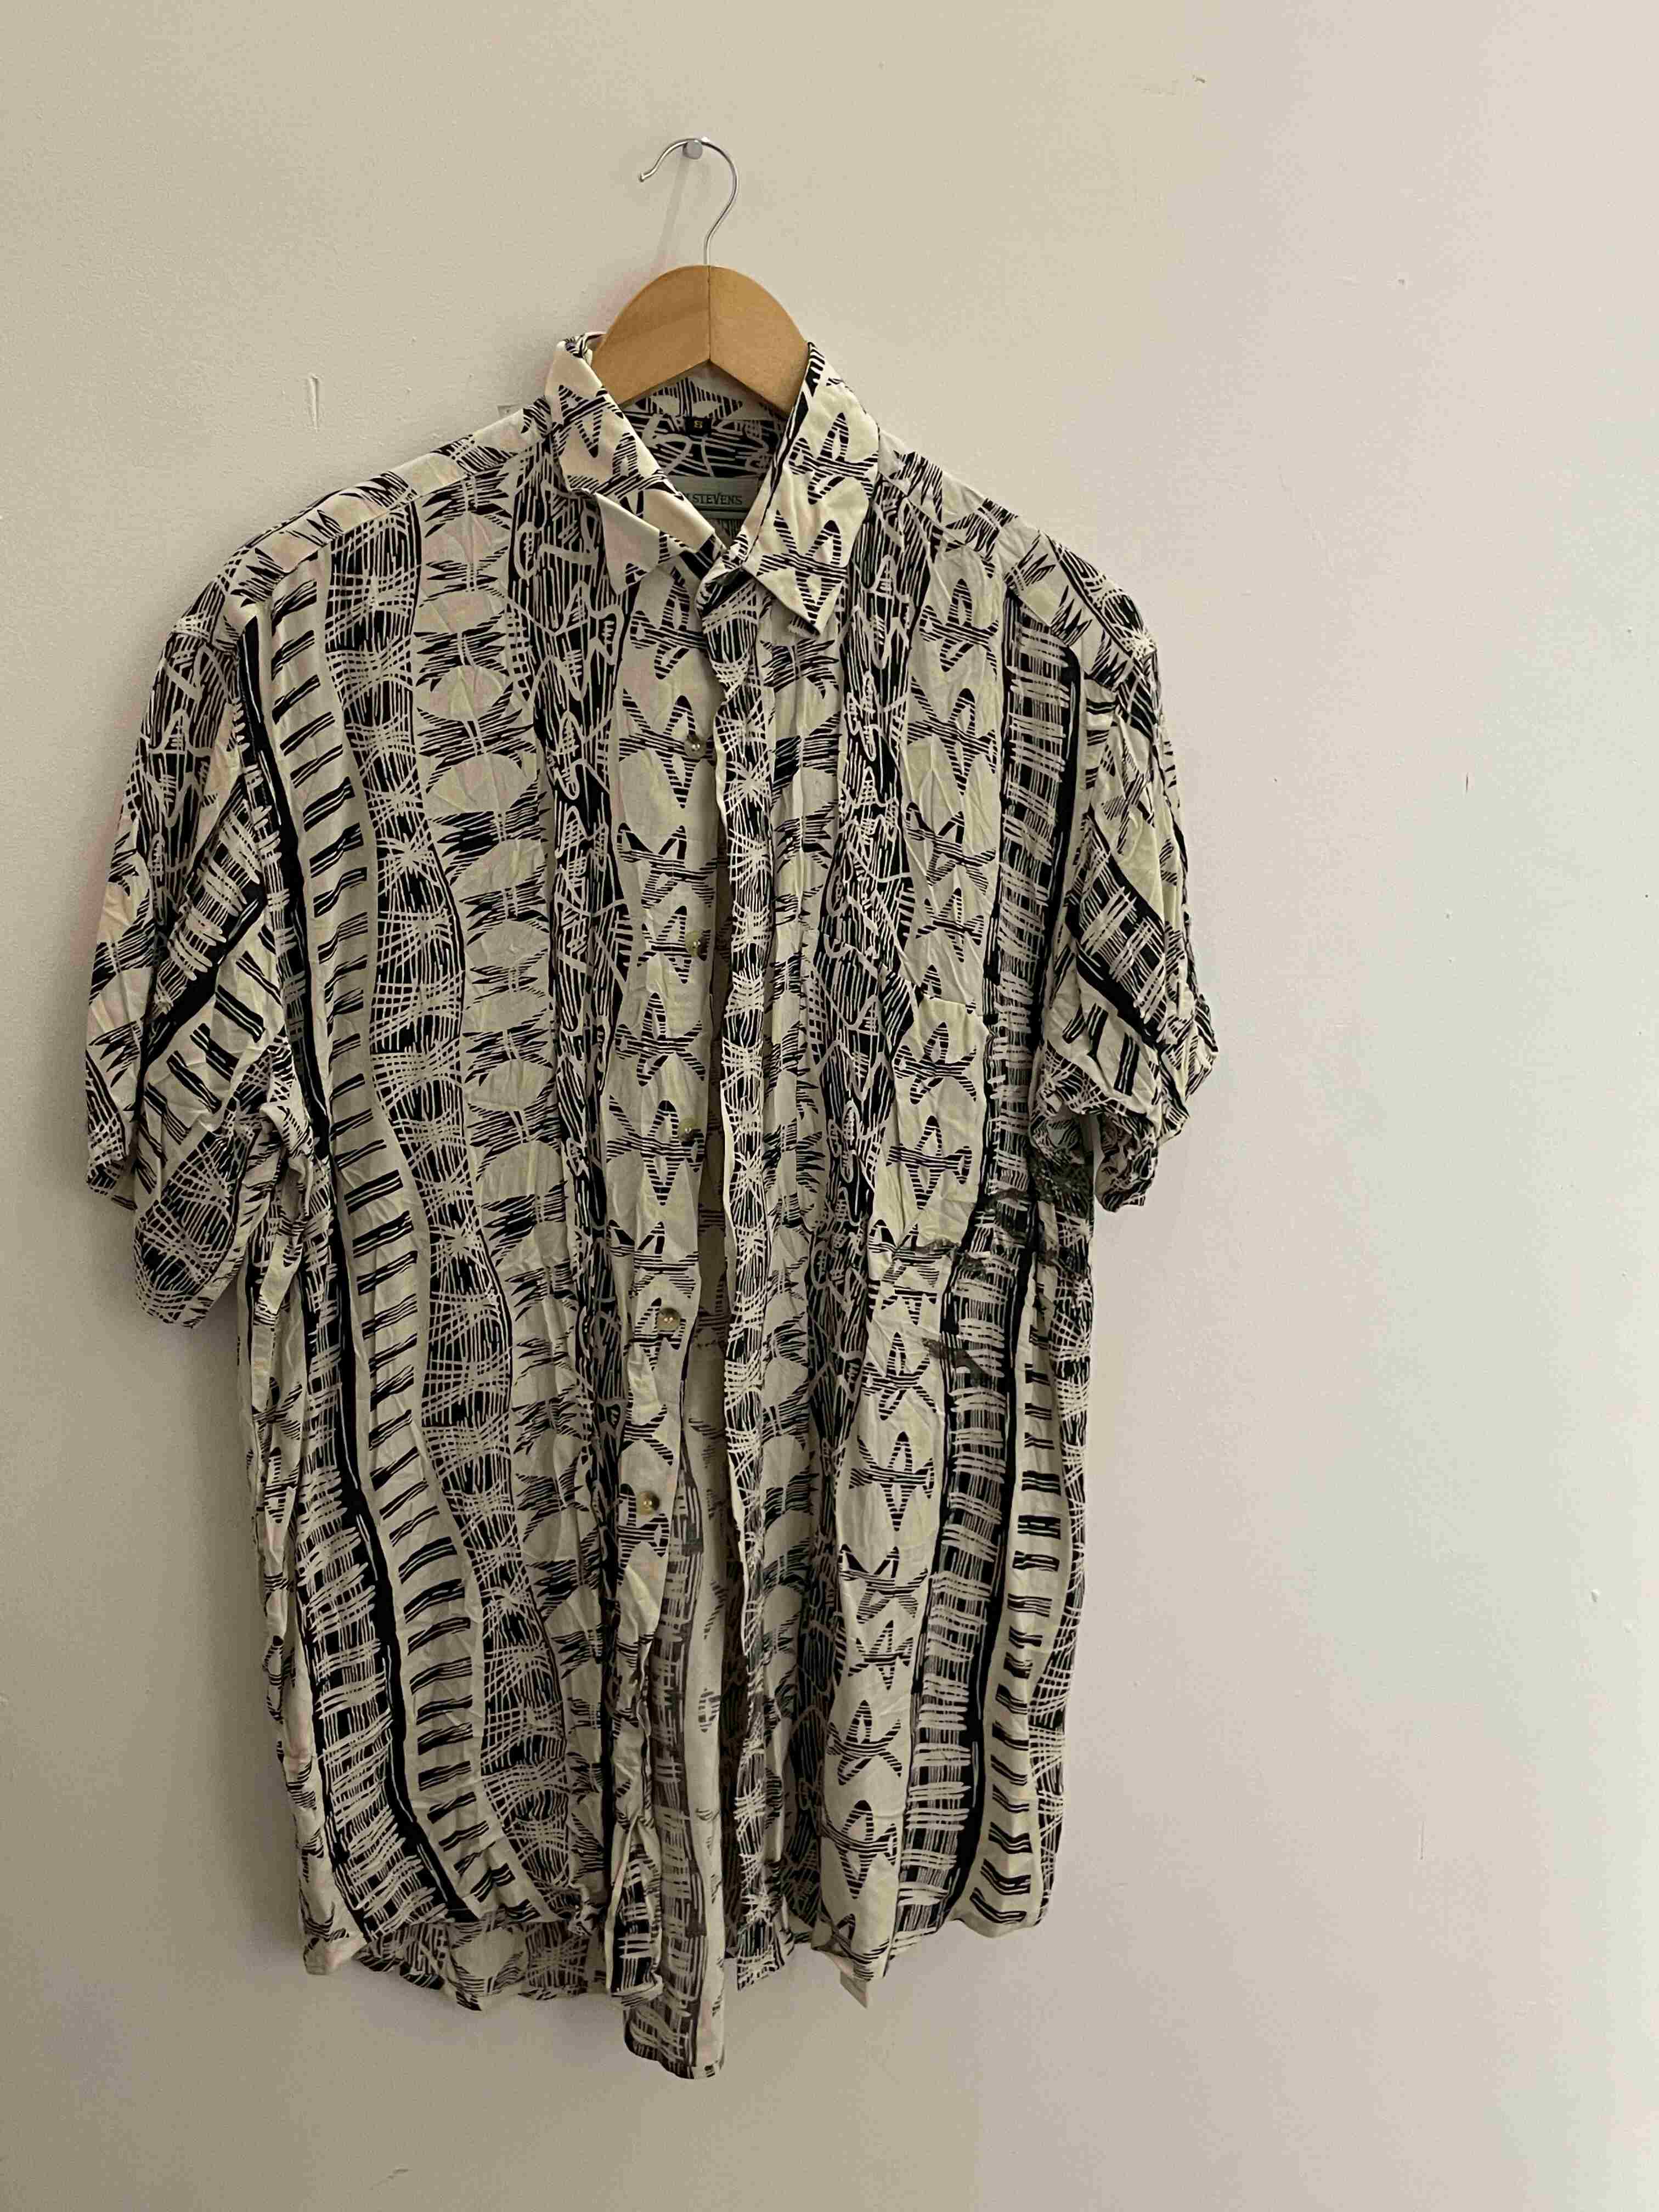 Vintage john stevens small white and black abstract pattern small shirt